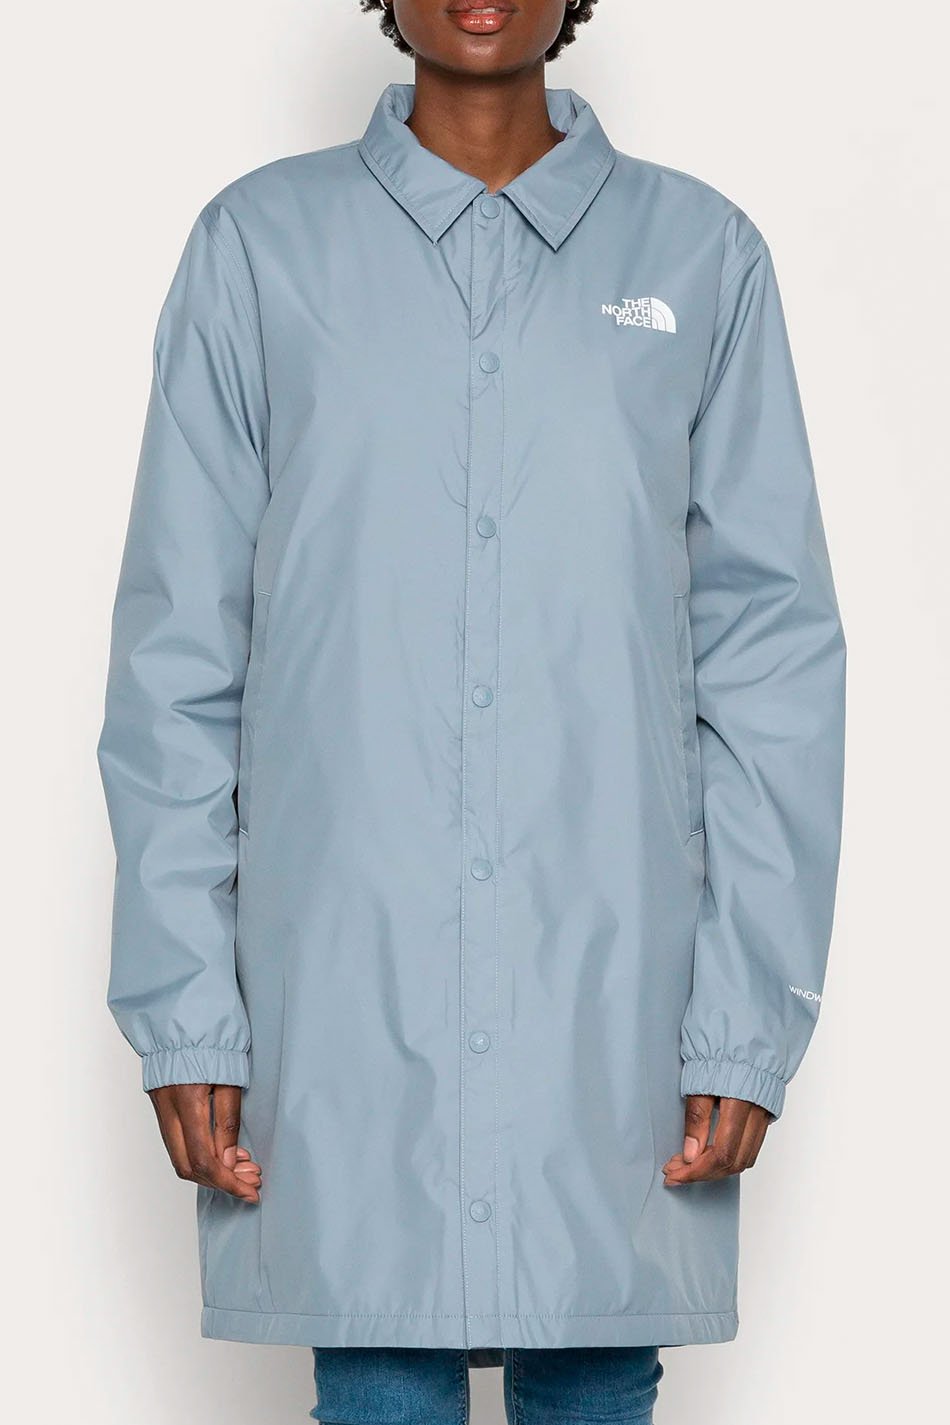 The North Face Coaches Jacket